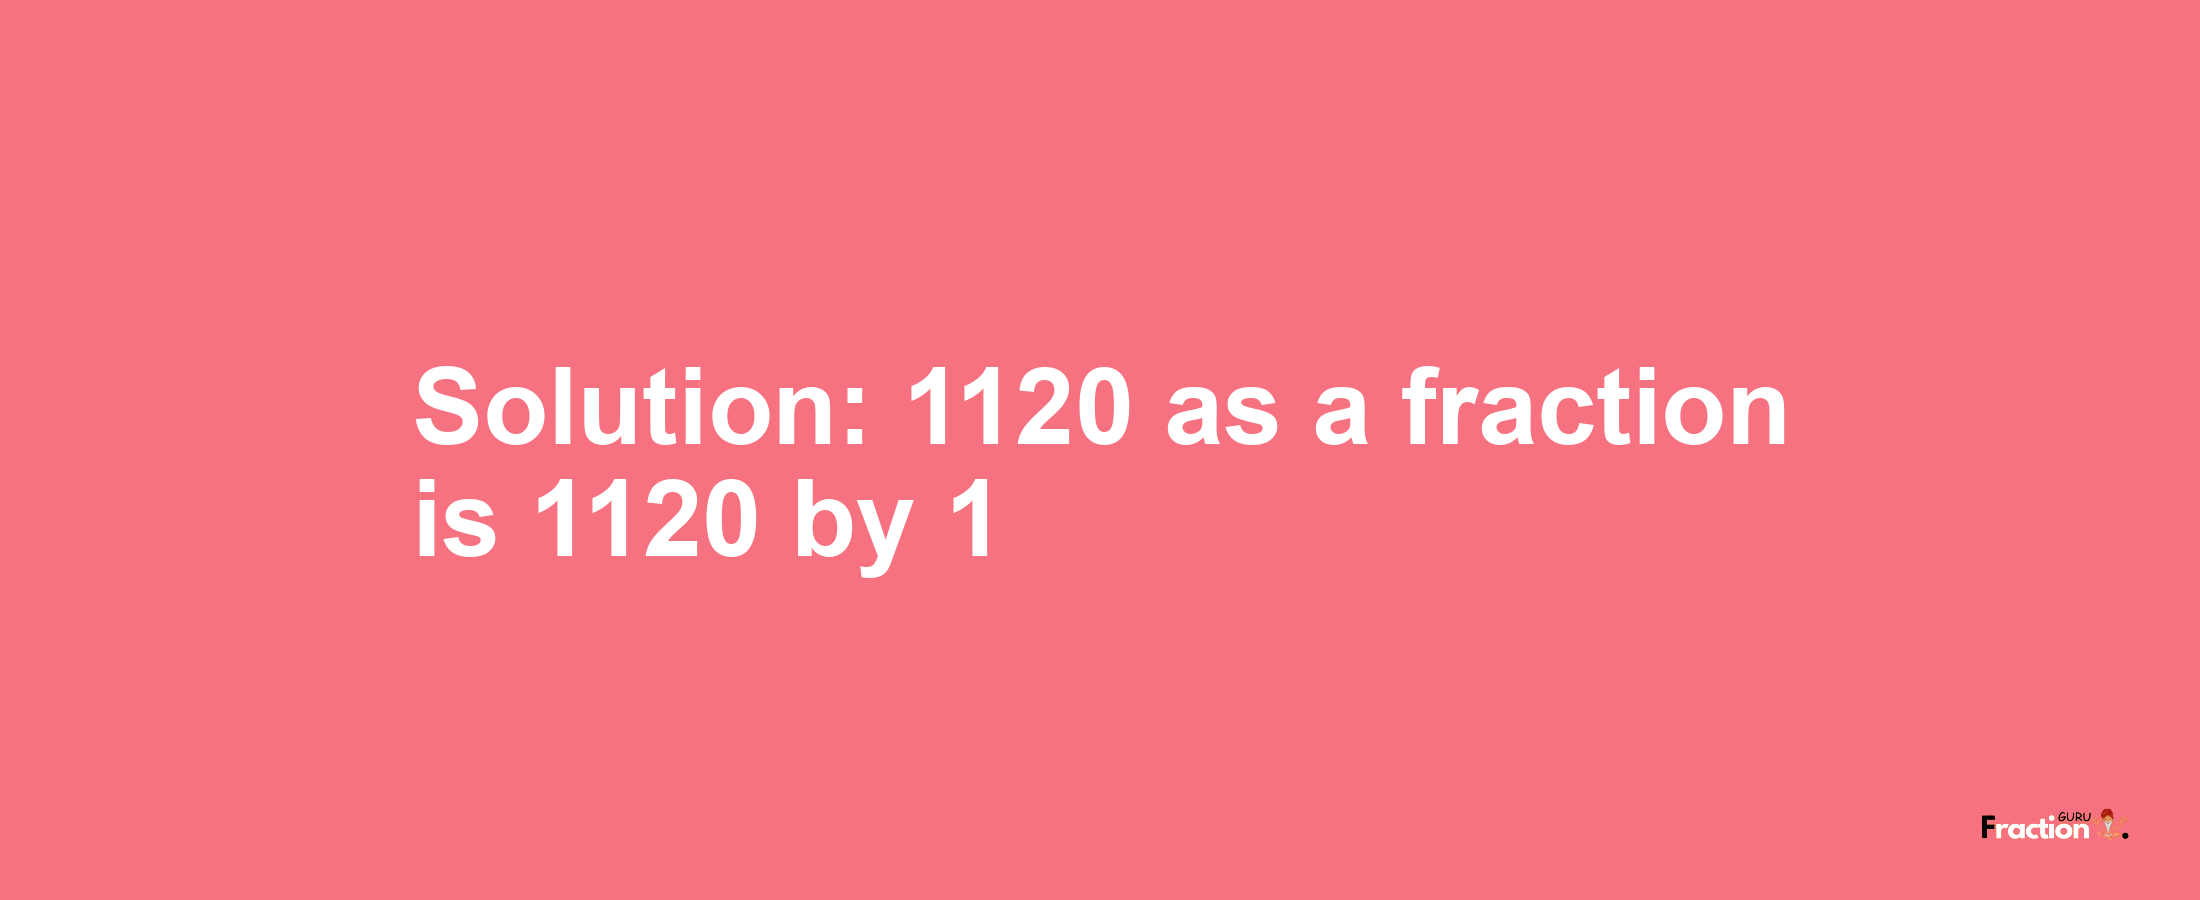 Solution:1120 as a fraction is 1120/1